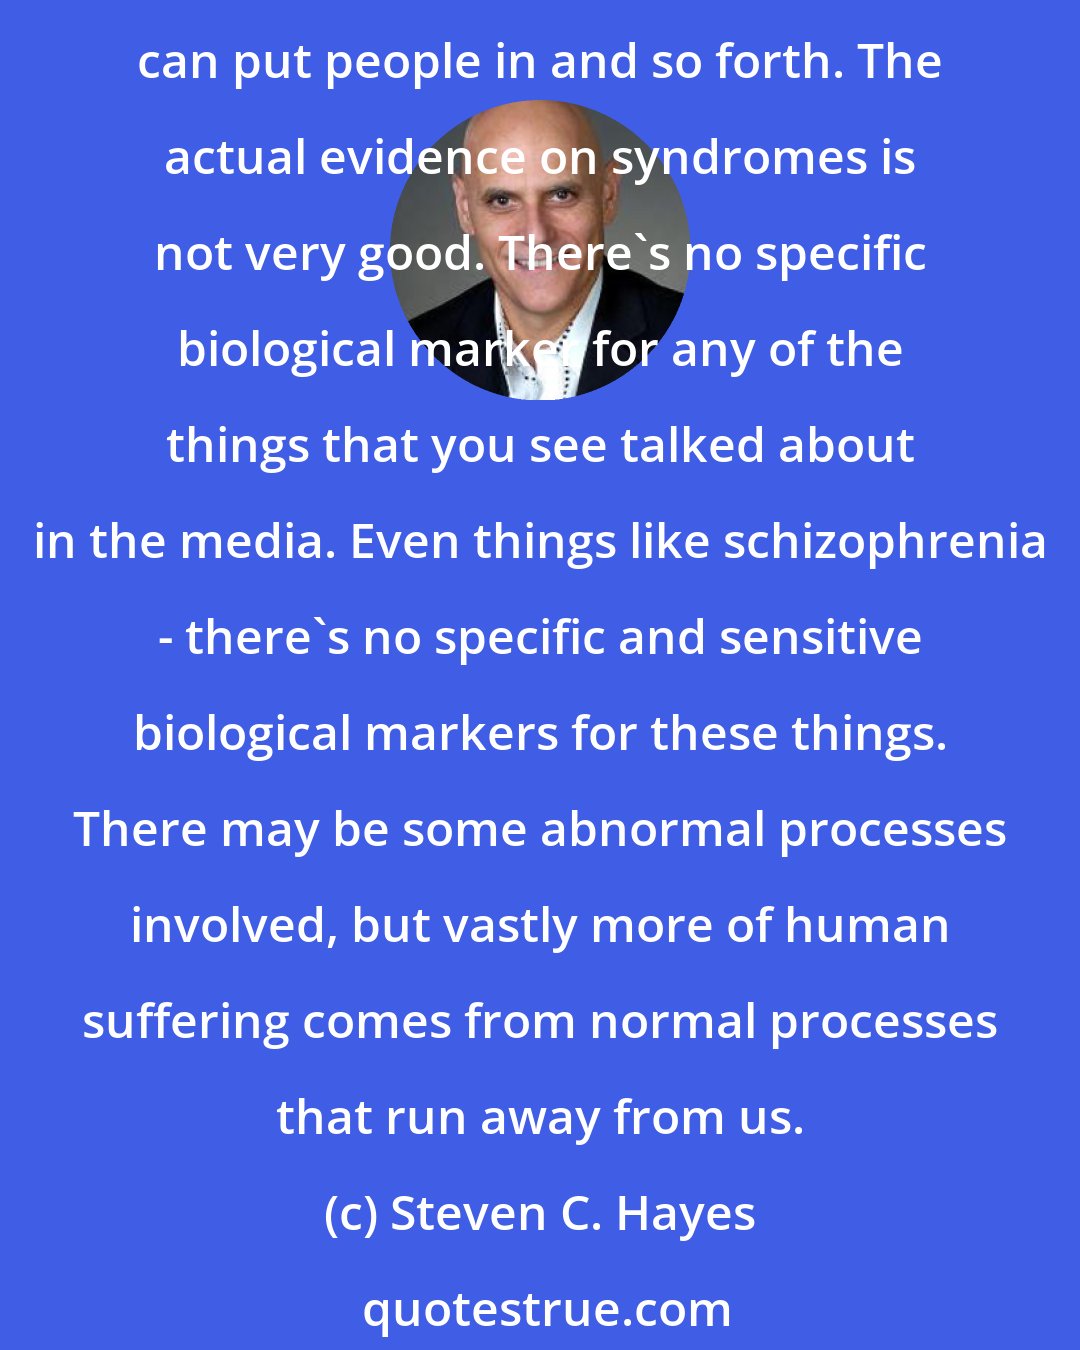 Steven C. Hayes: ACT psychology is a psychology of the normal. A lot of the psychologies that are out there are built on the psychology of the abnormal. We have all these syndromal boxes that we can put people in and so forth. The actual evidence on syndromes is not very good. There's no specific biological marker for any of the things that you see talked about in the media. Even things like schizophrenia - there's no specific and sensitive biological markers for these things. There may be some abnormal processes involved, but vastly more of human suffering comes from normal processes that run away from us.